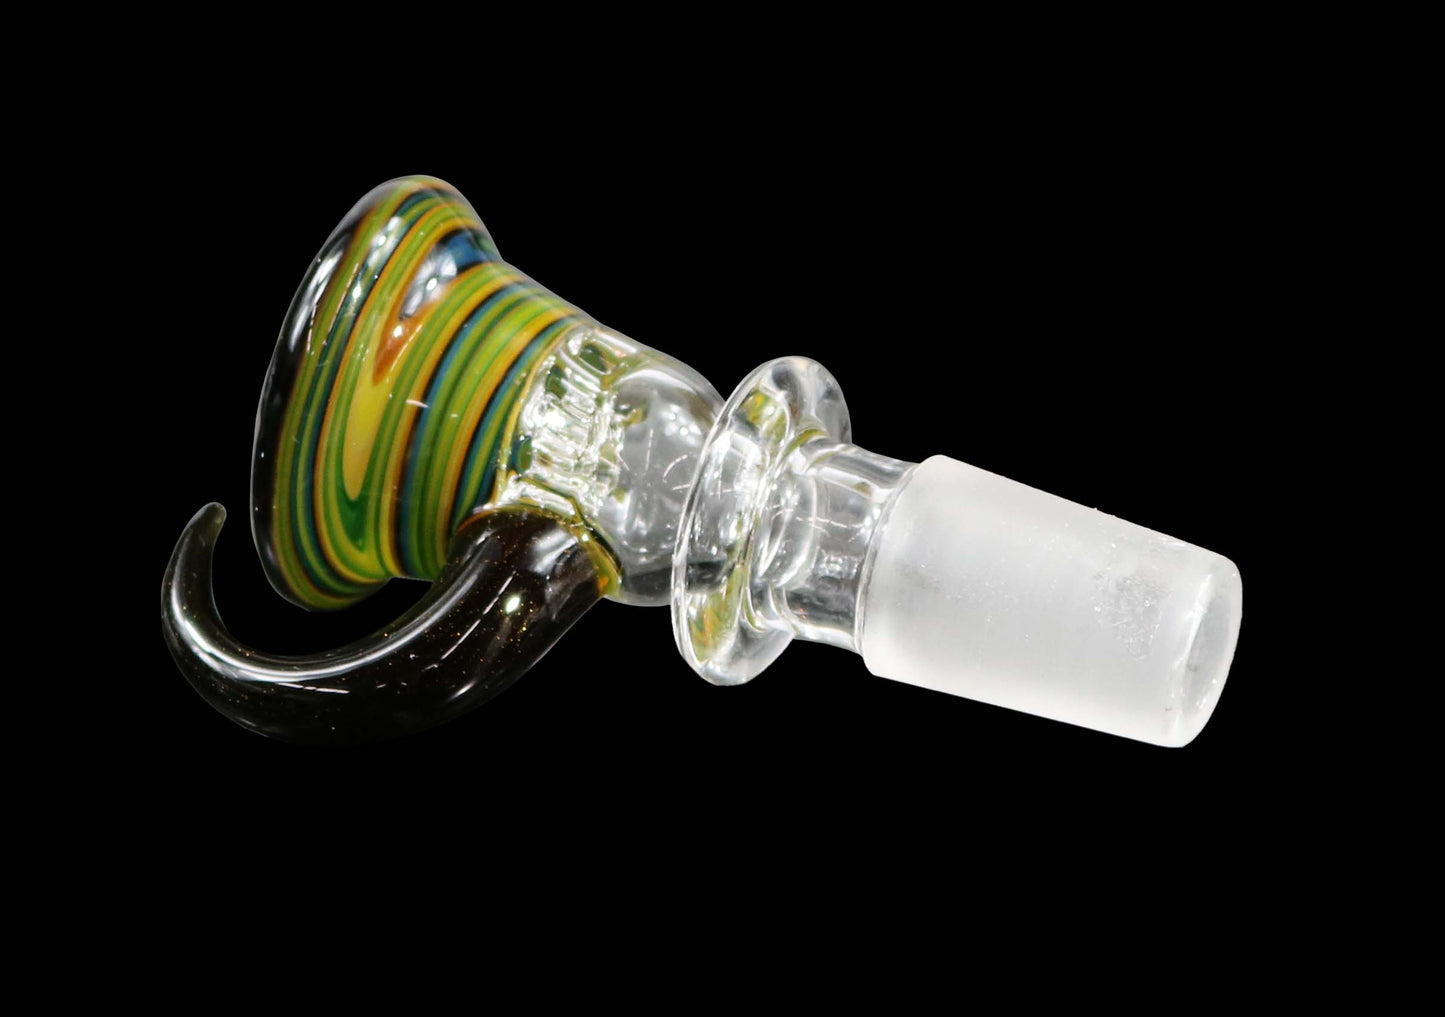 14mm Martini Bong Slide with built in screen from Glass by Slick - Green/Yellow/Black/Blue